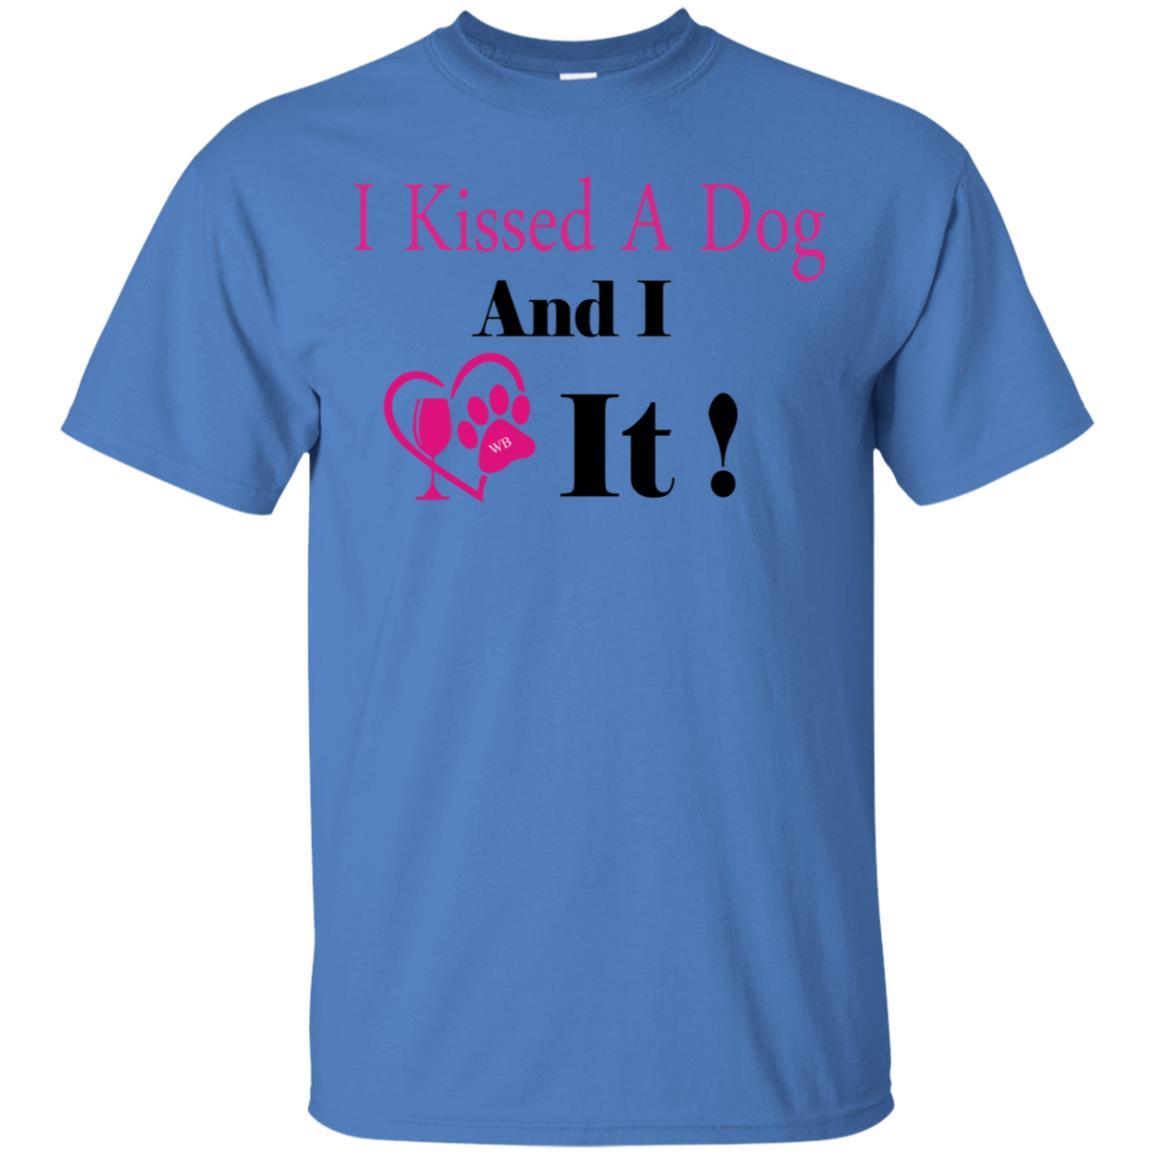 T-Shirts Iris / S WineyBitches.co "I Kissed A Dog And I Loved It:" Ultra Cotton T-Shirt WineyBitchesCo